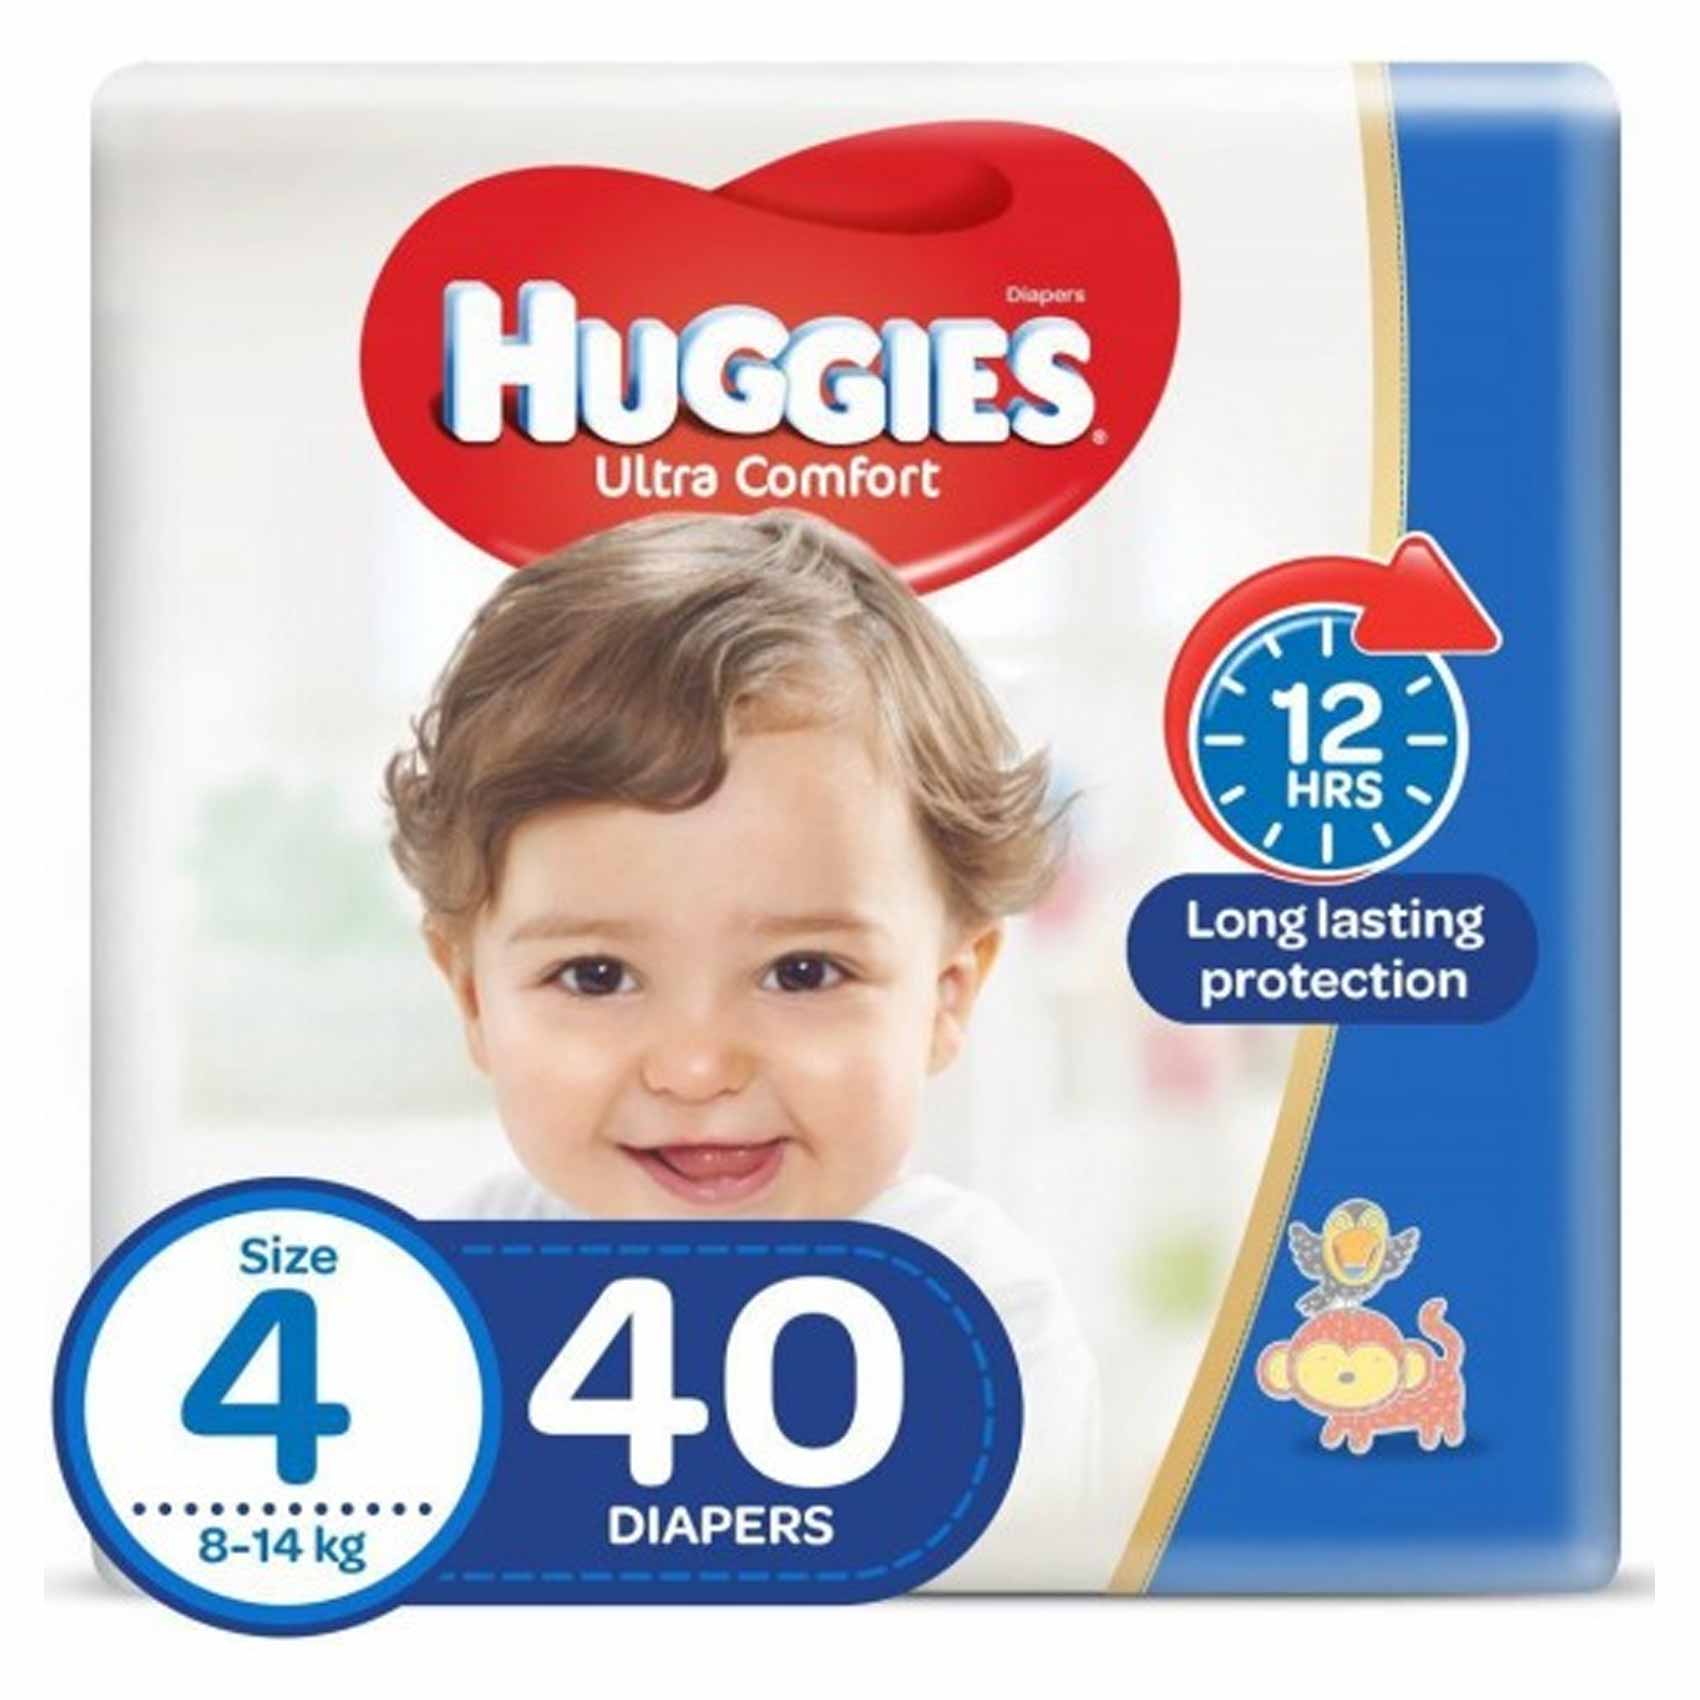 Huggies Diapers No.4 Size 8-14 Kg 40 Diapers